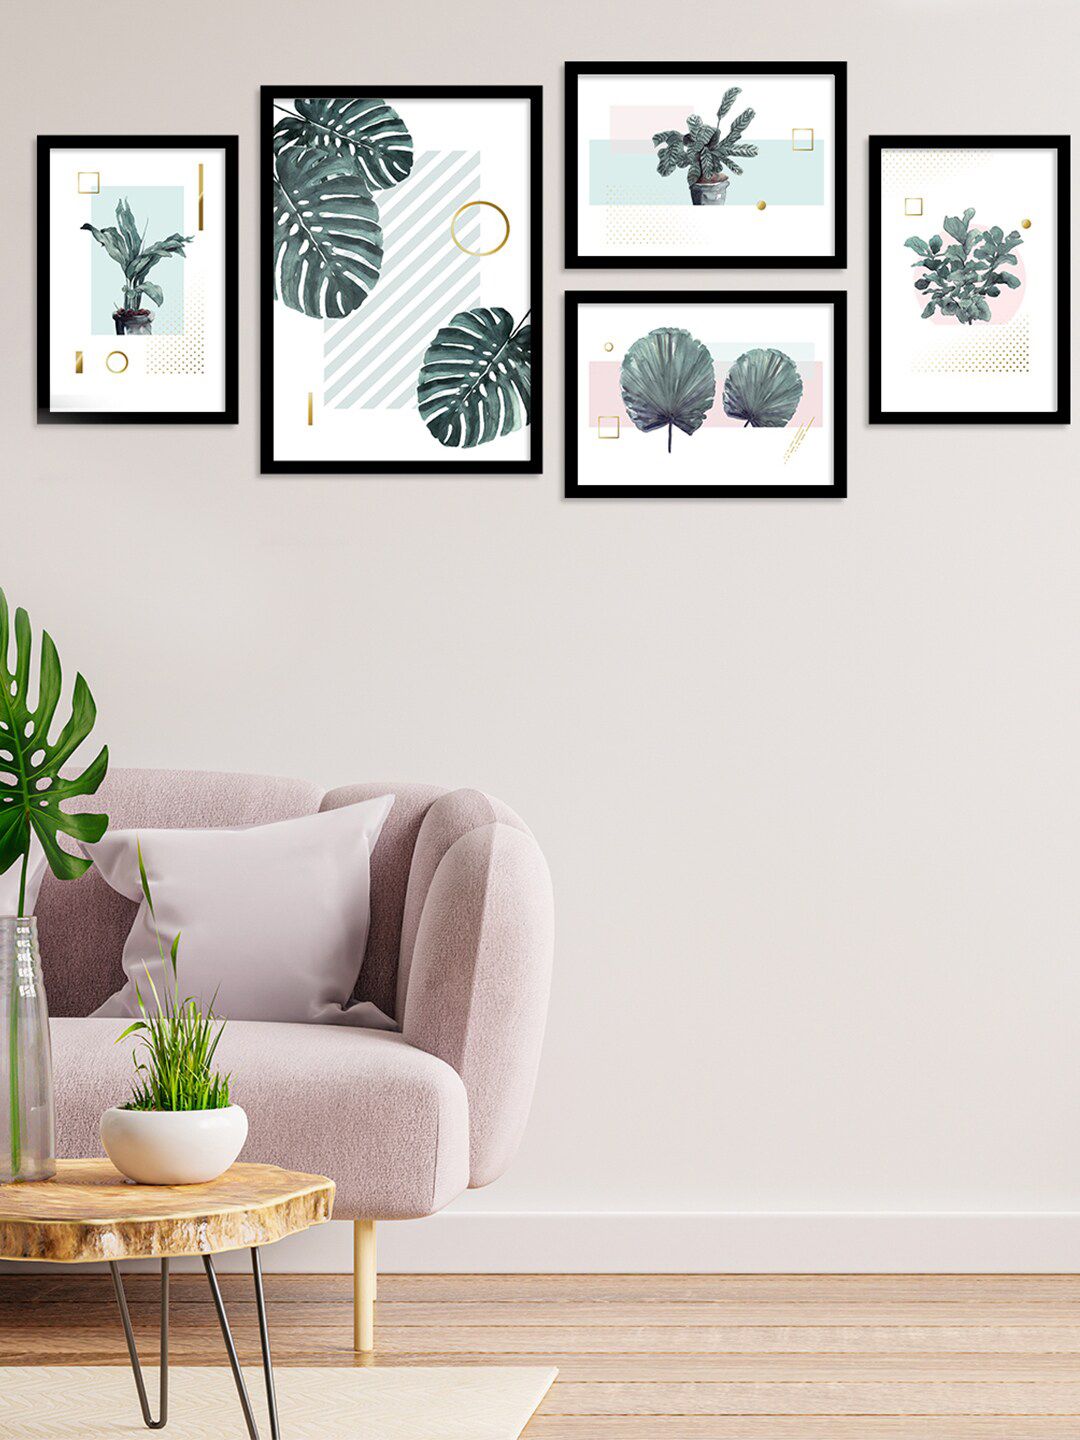 Art Street Set Of 5 Green & White Printed Tropical Plant Framed Art Print Painting Wall Art Price in India